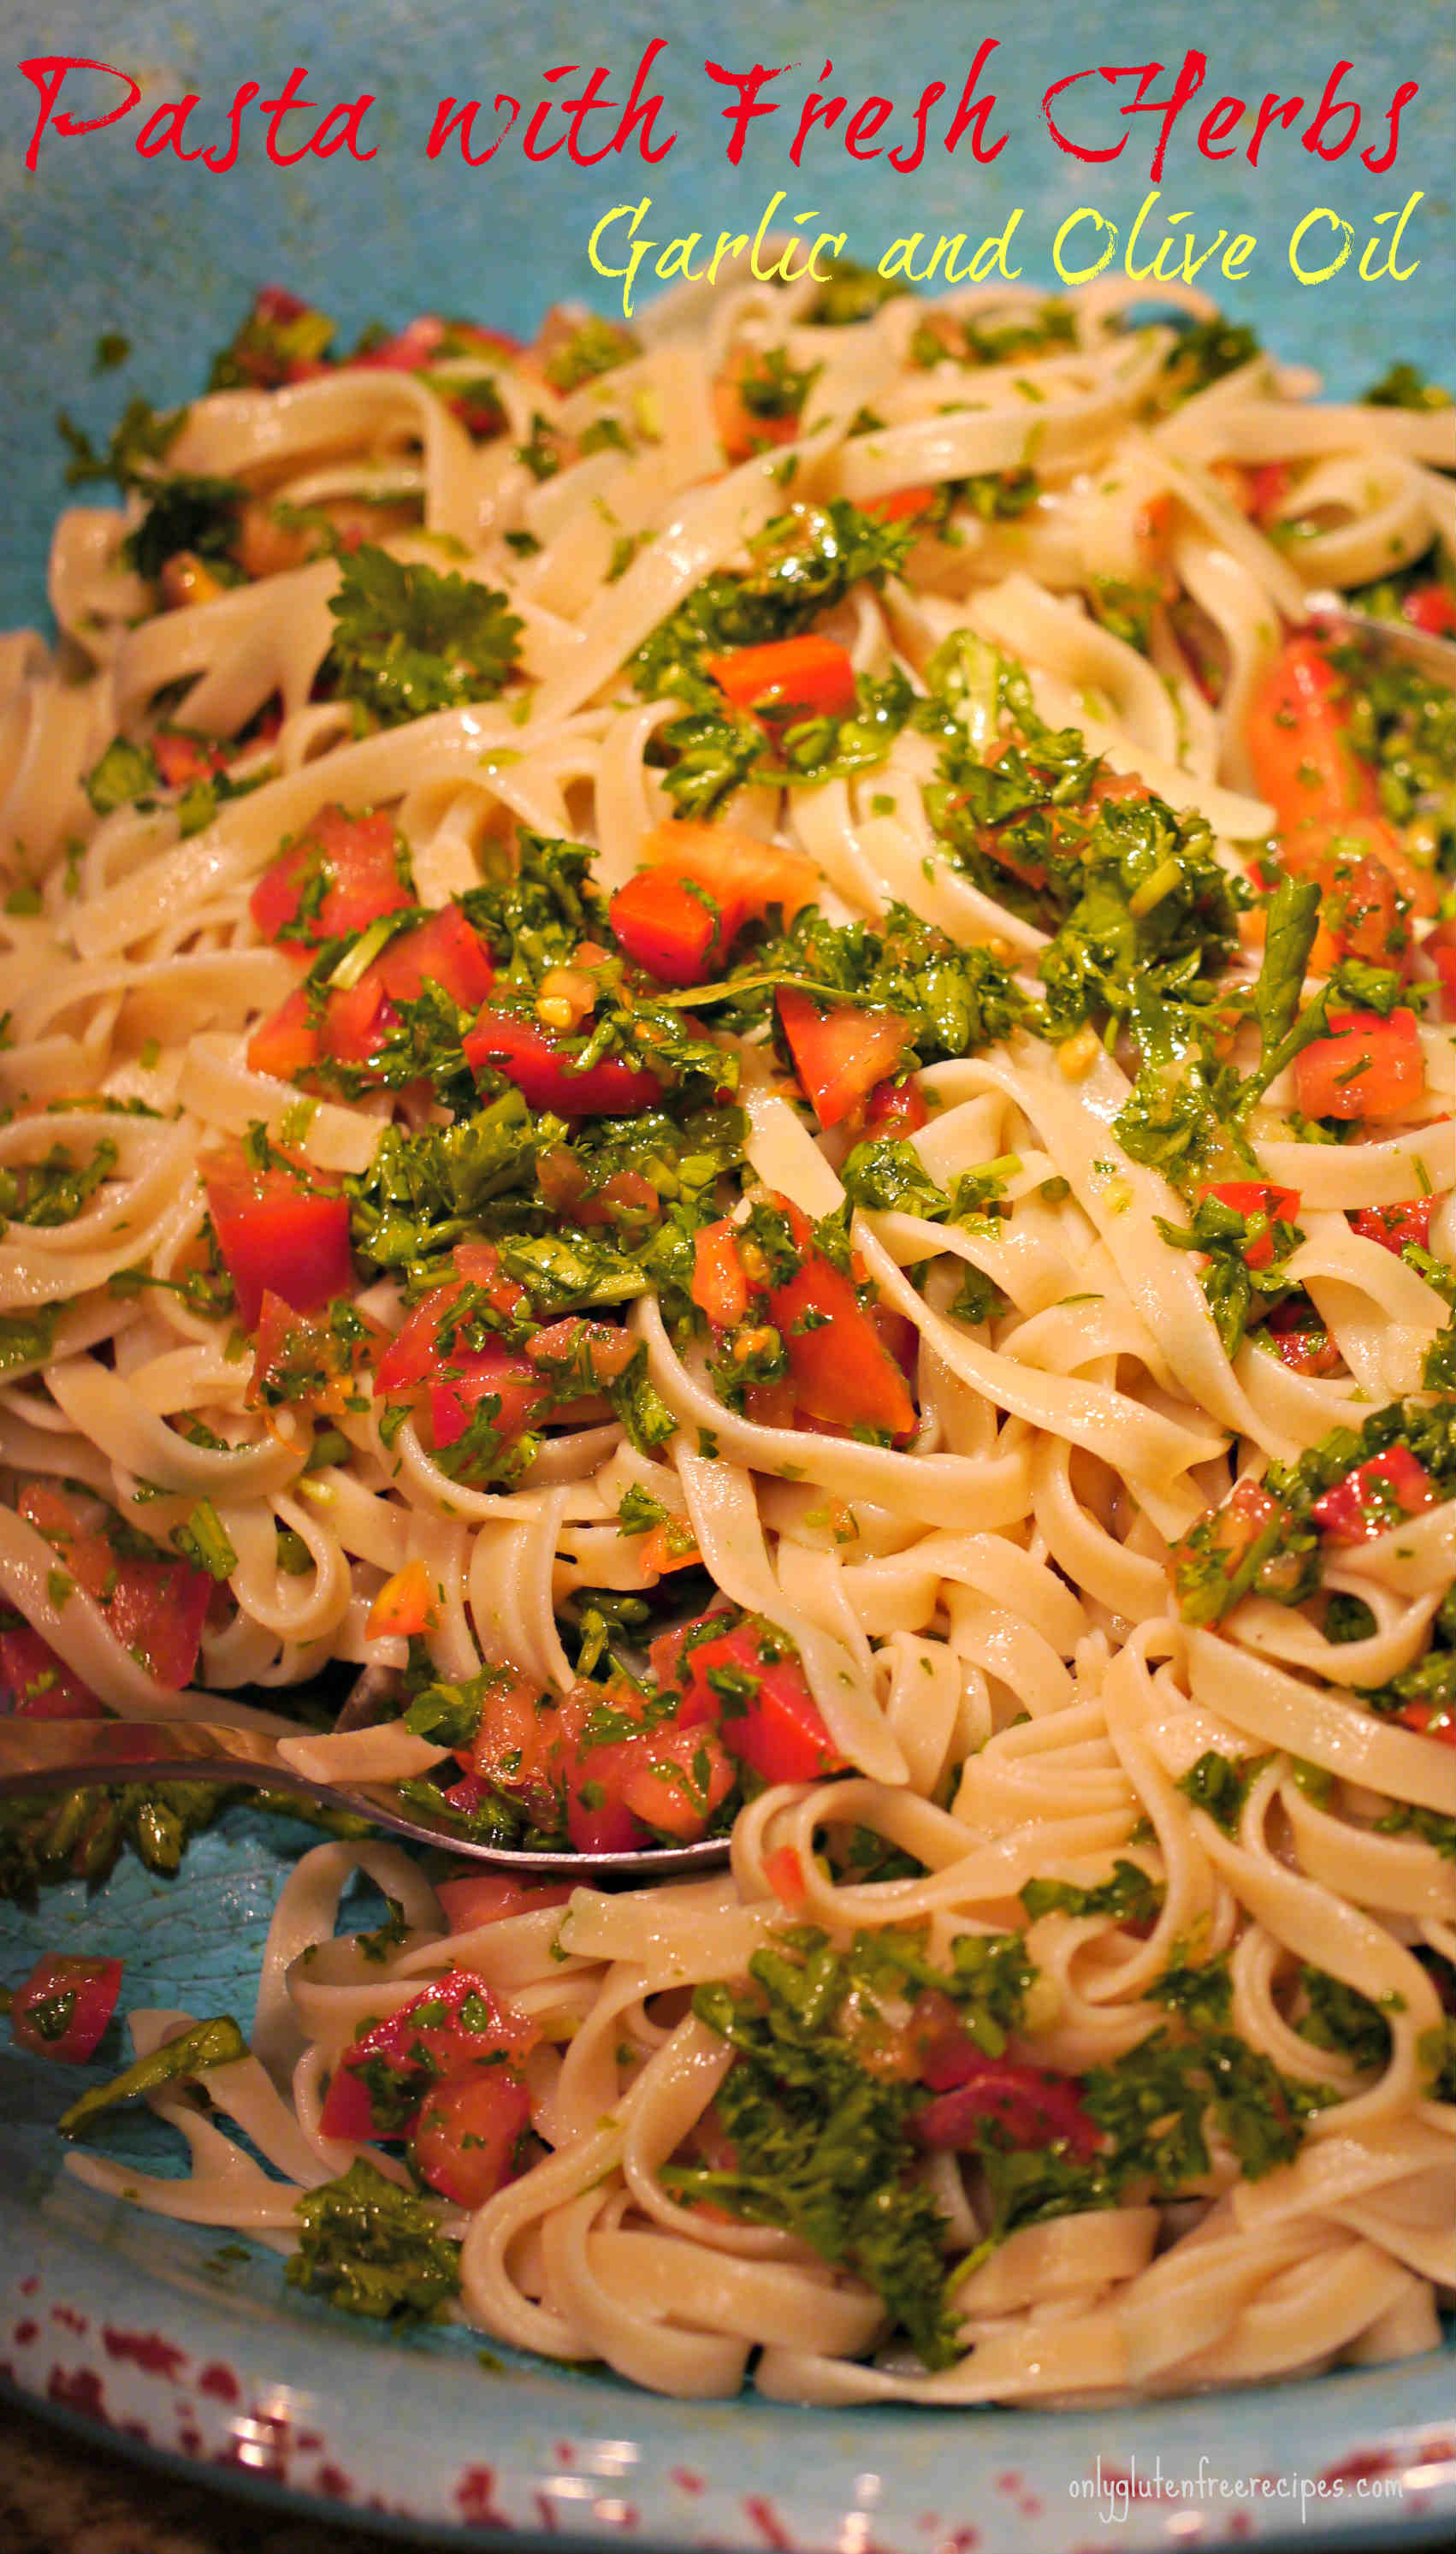 Pasta with Fresh Herbs, Garlic and Olive Oil - Only Gluten Free Recipes